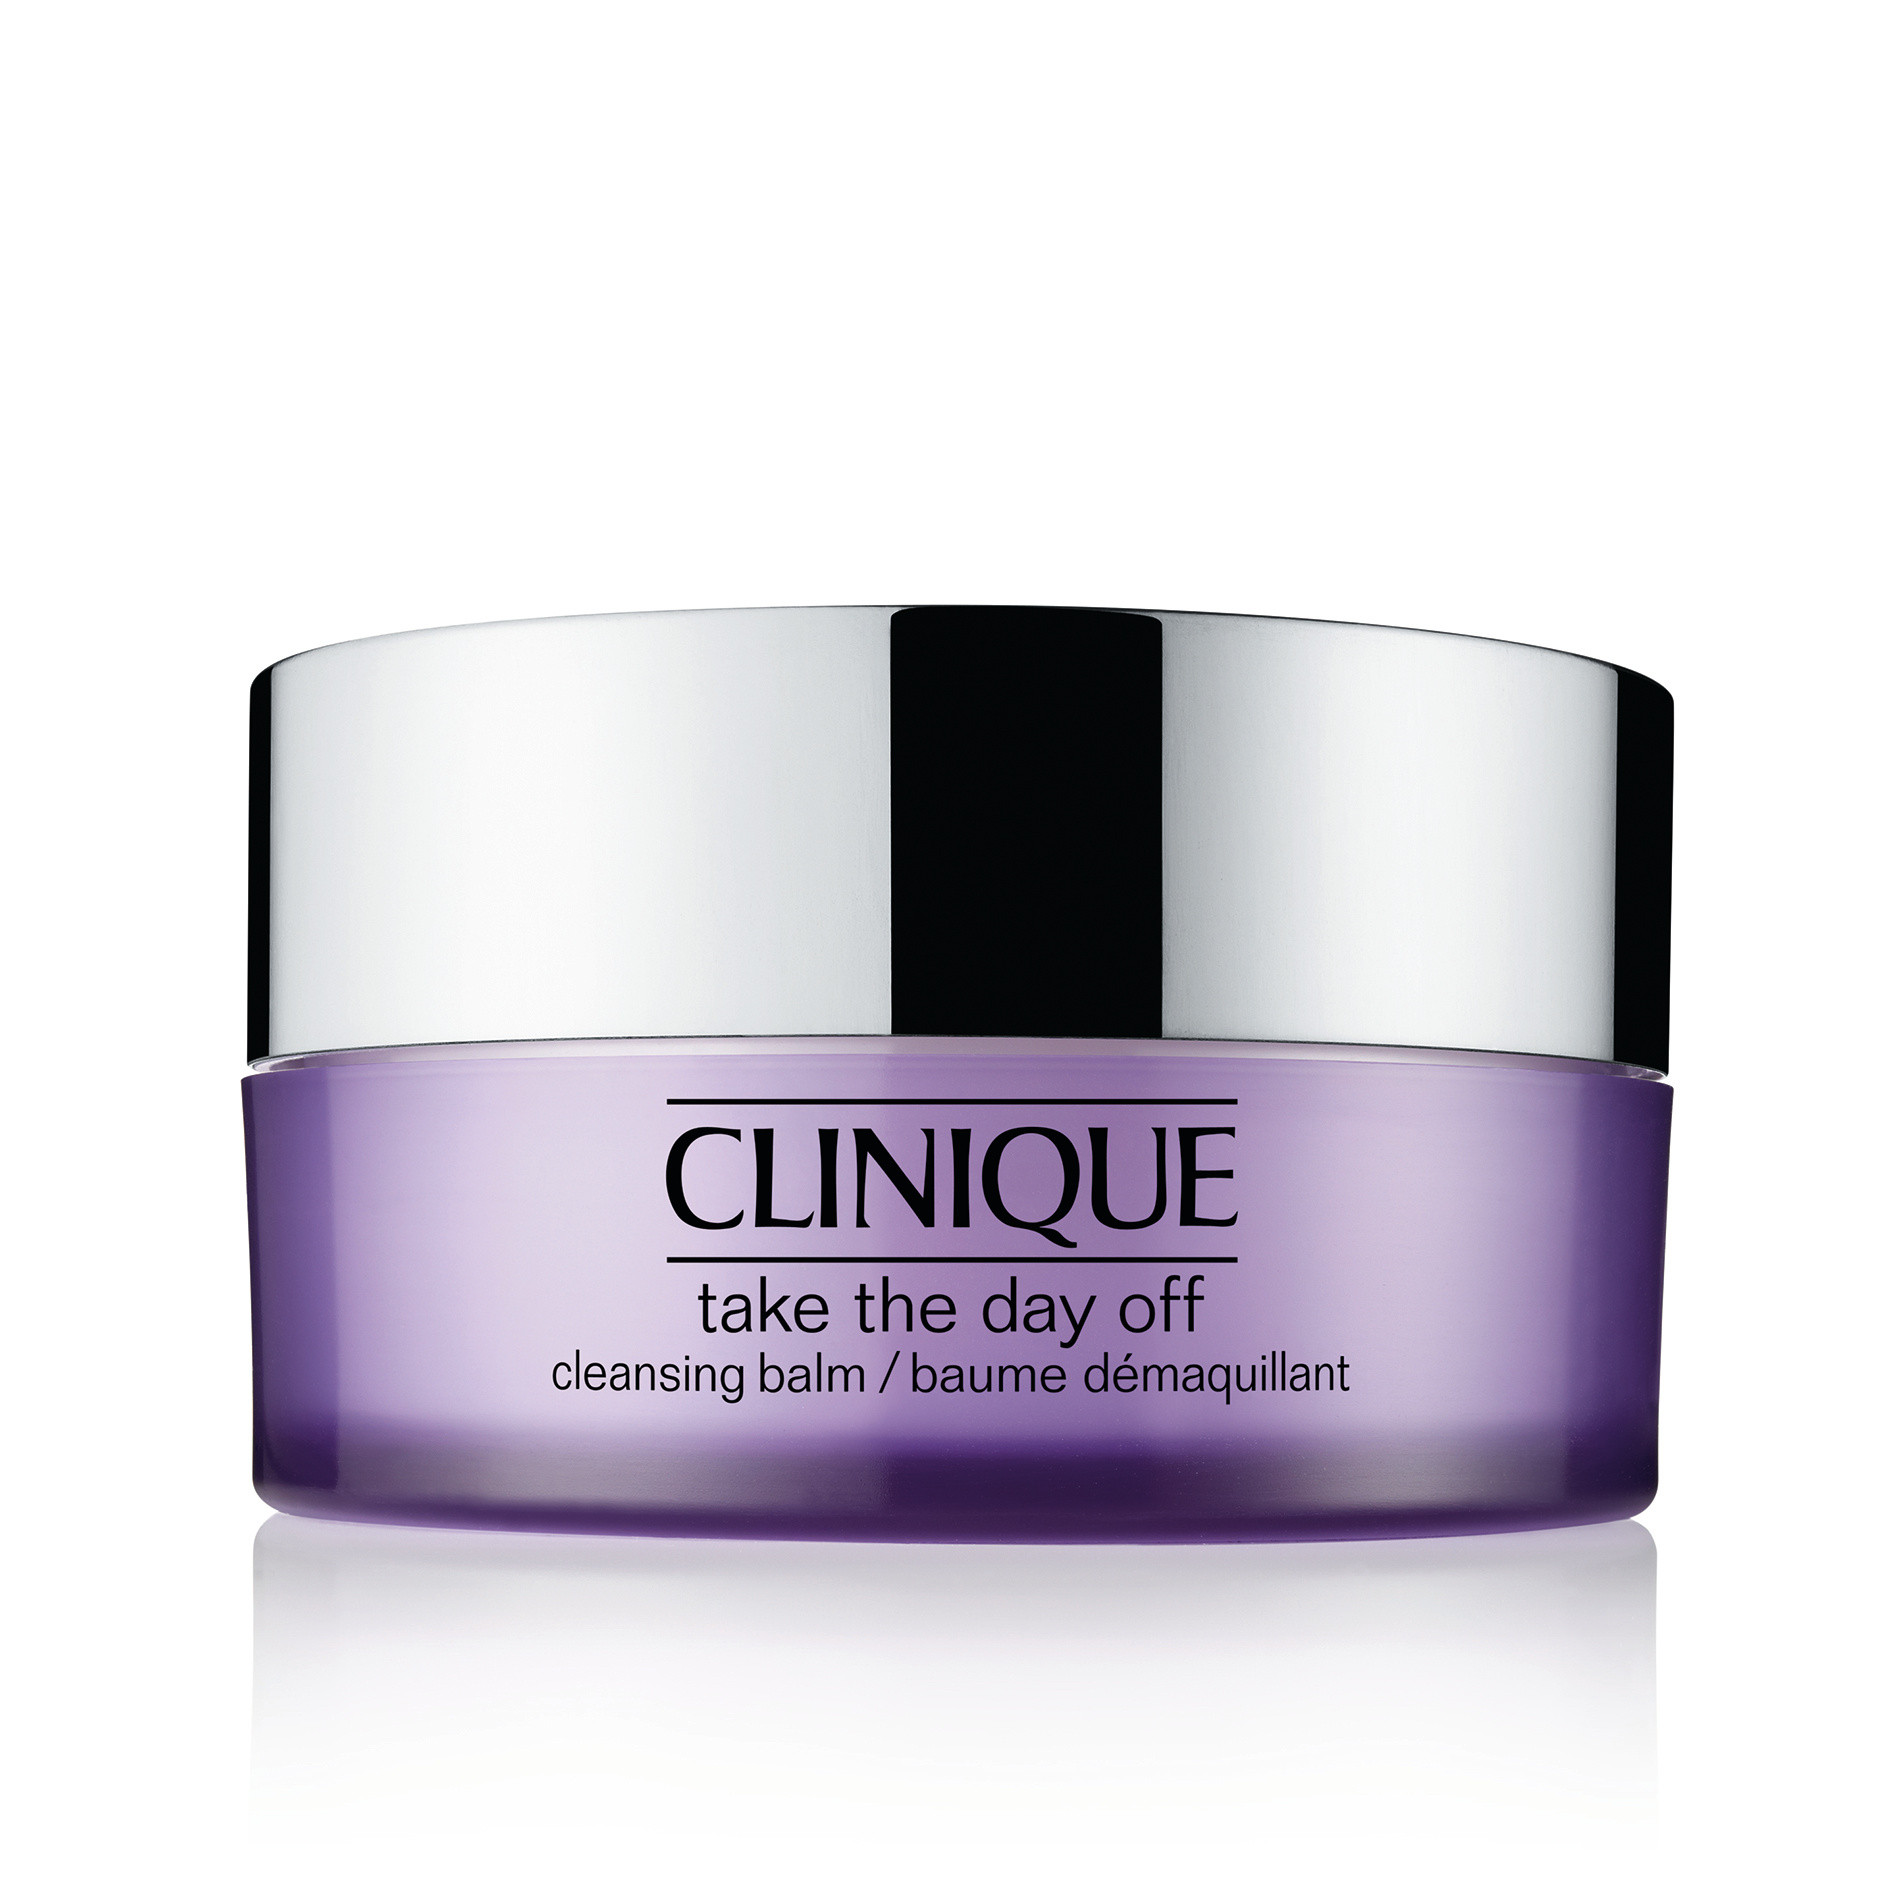 Clinique take the day off cleansing balm 125 ml, Purple, large image number 0